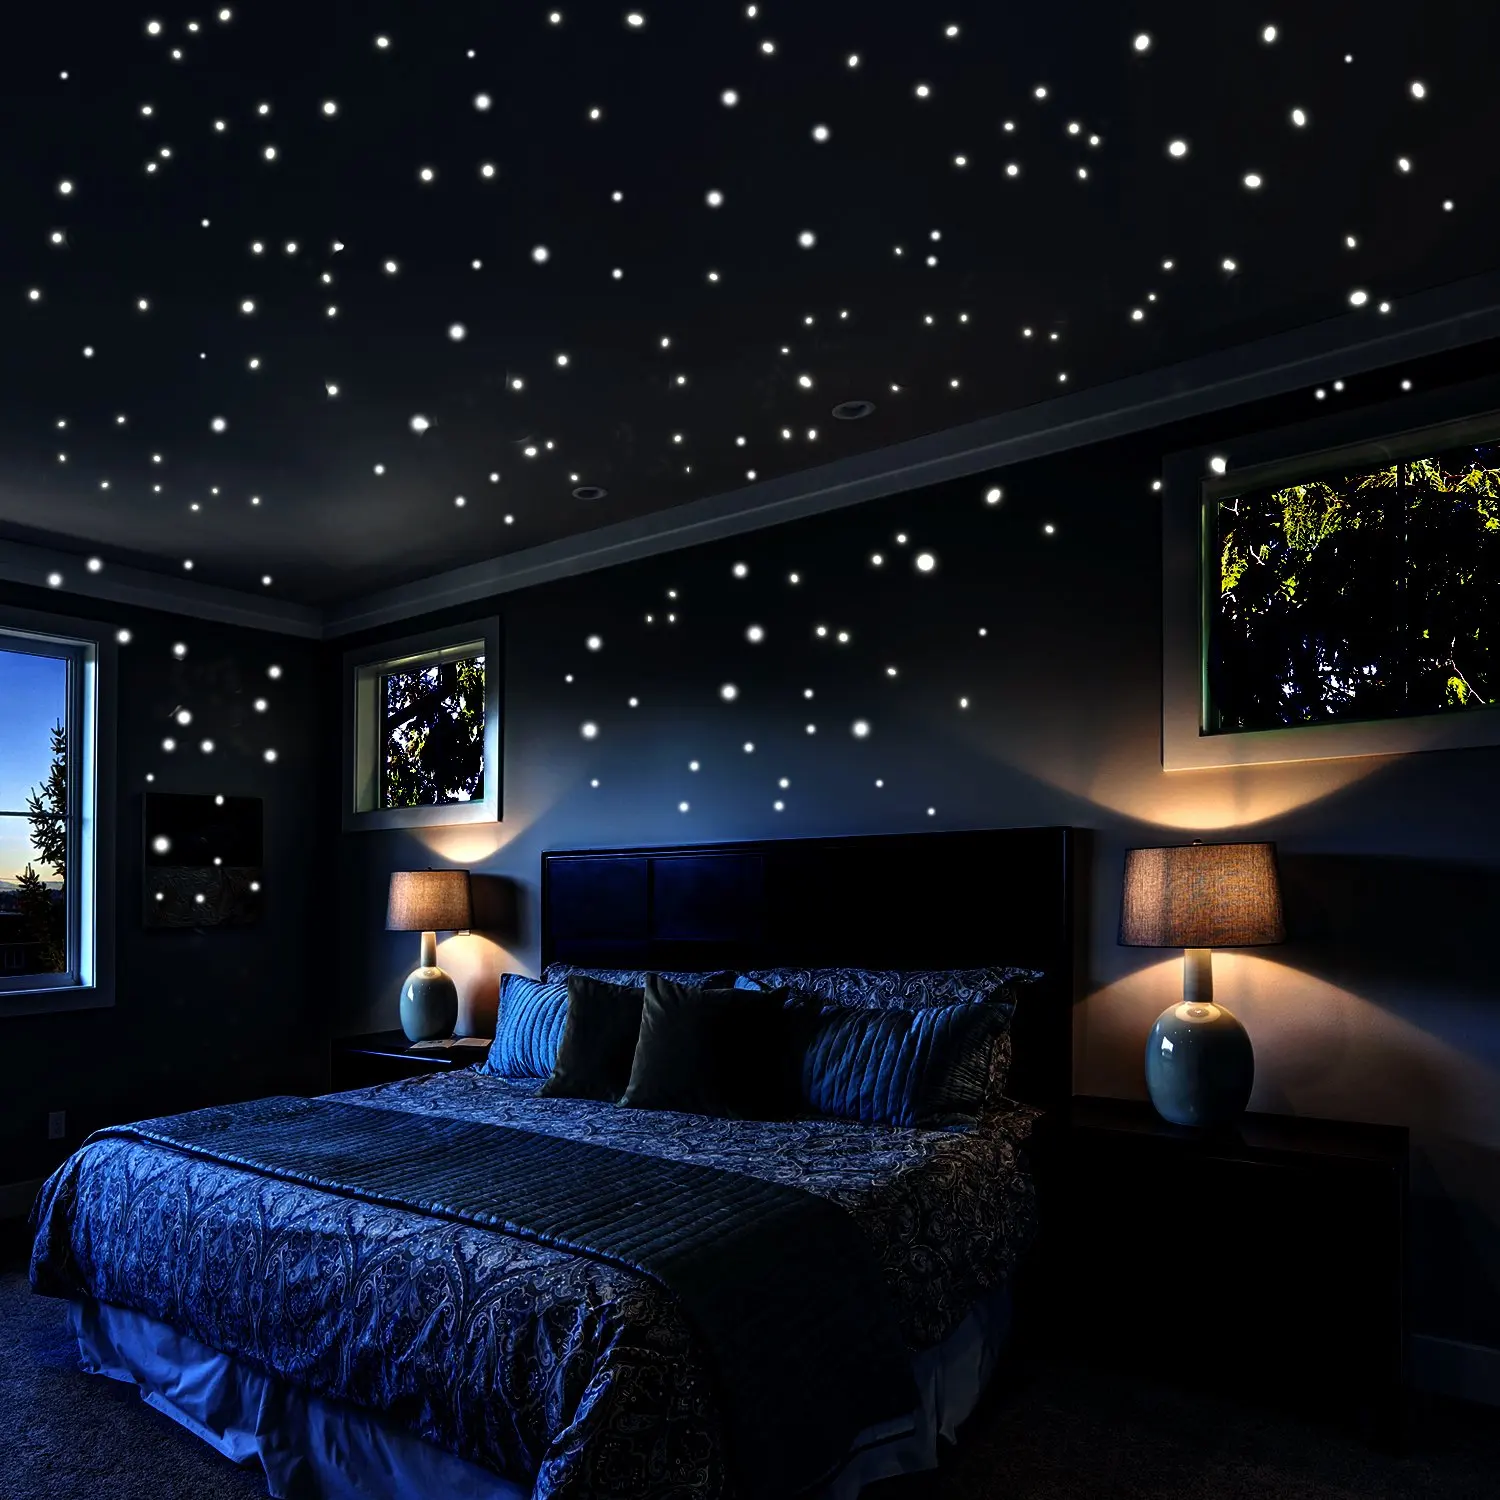 Buy Glow In The Dark Stars Moon And Planet Wall Stickers